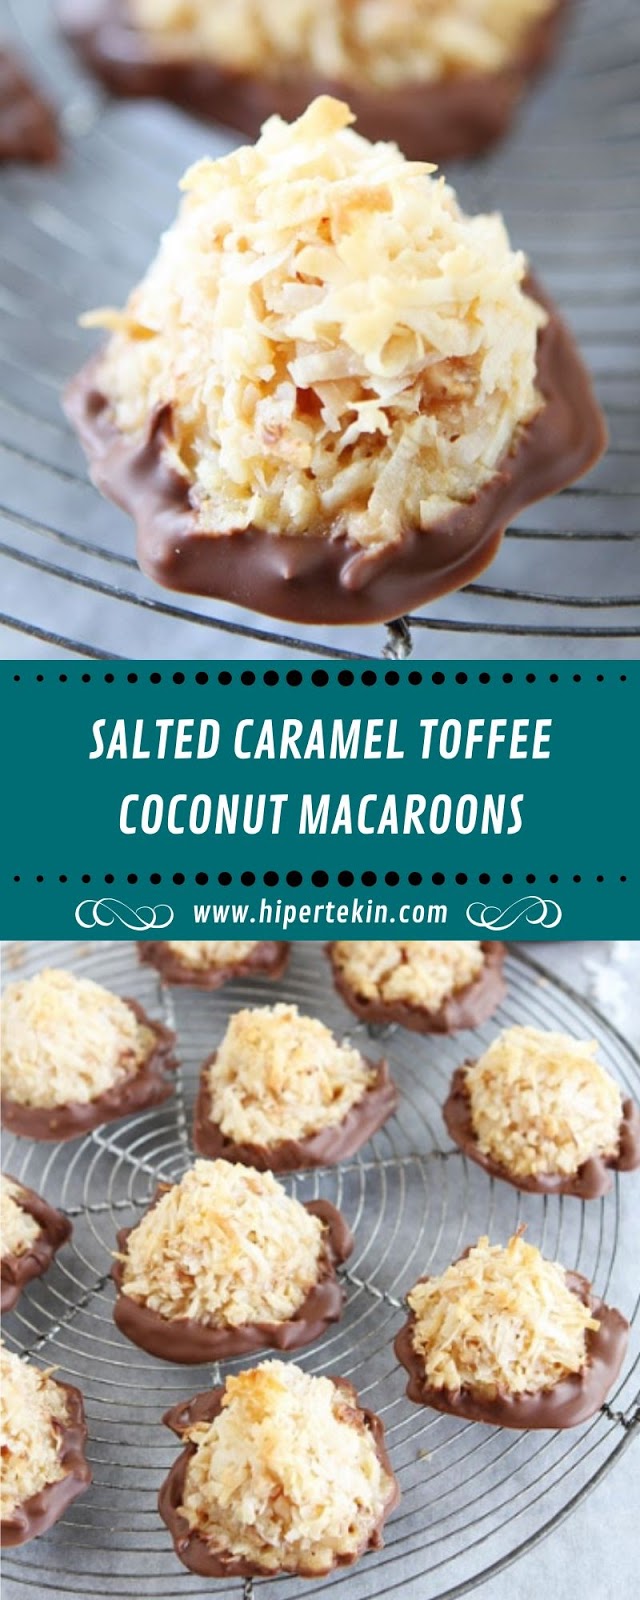 SALTED CARAMEL TOFFEE COCONUT MACAROONS